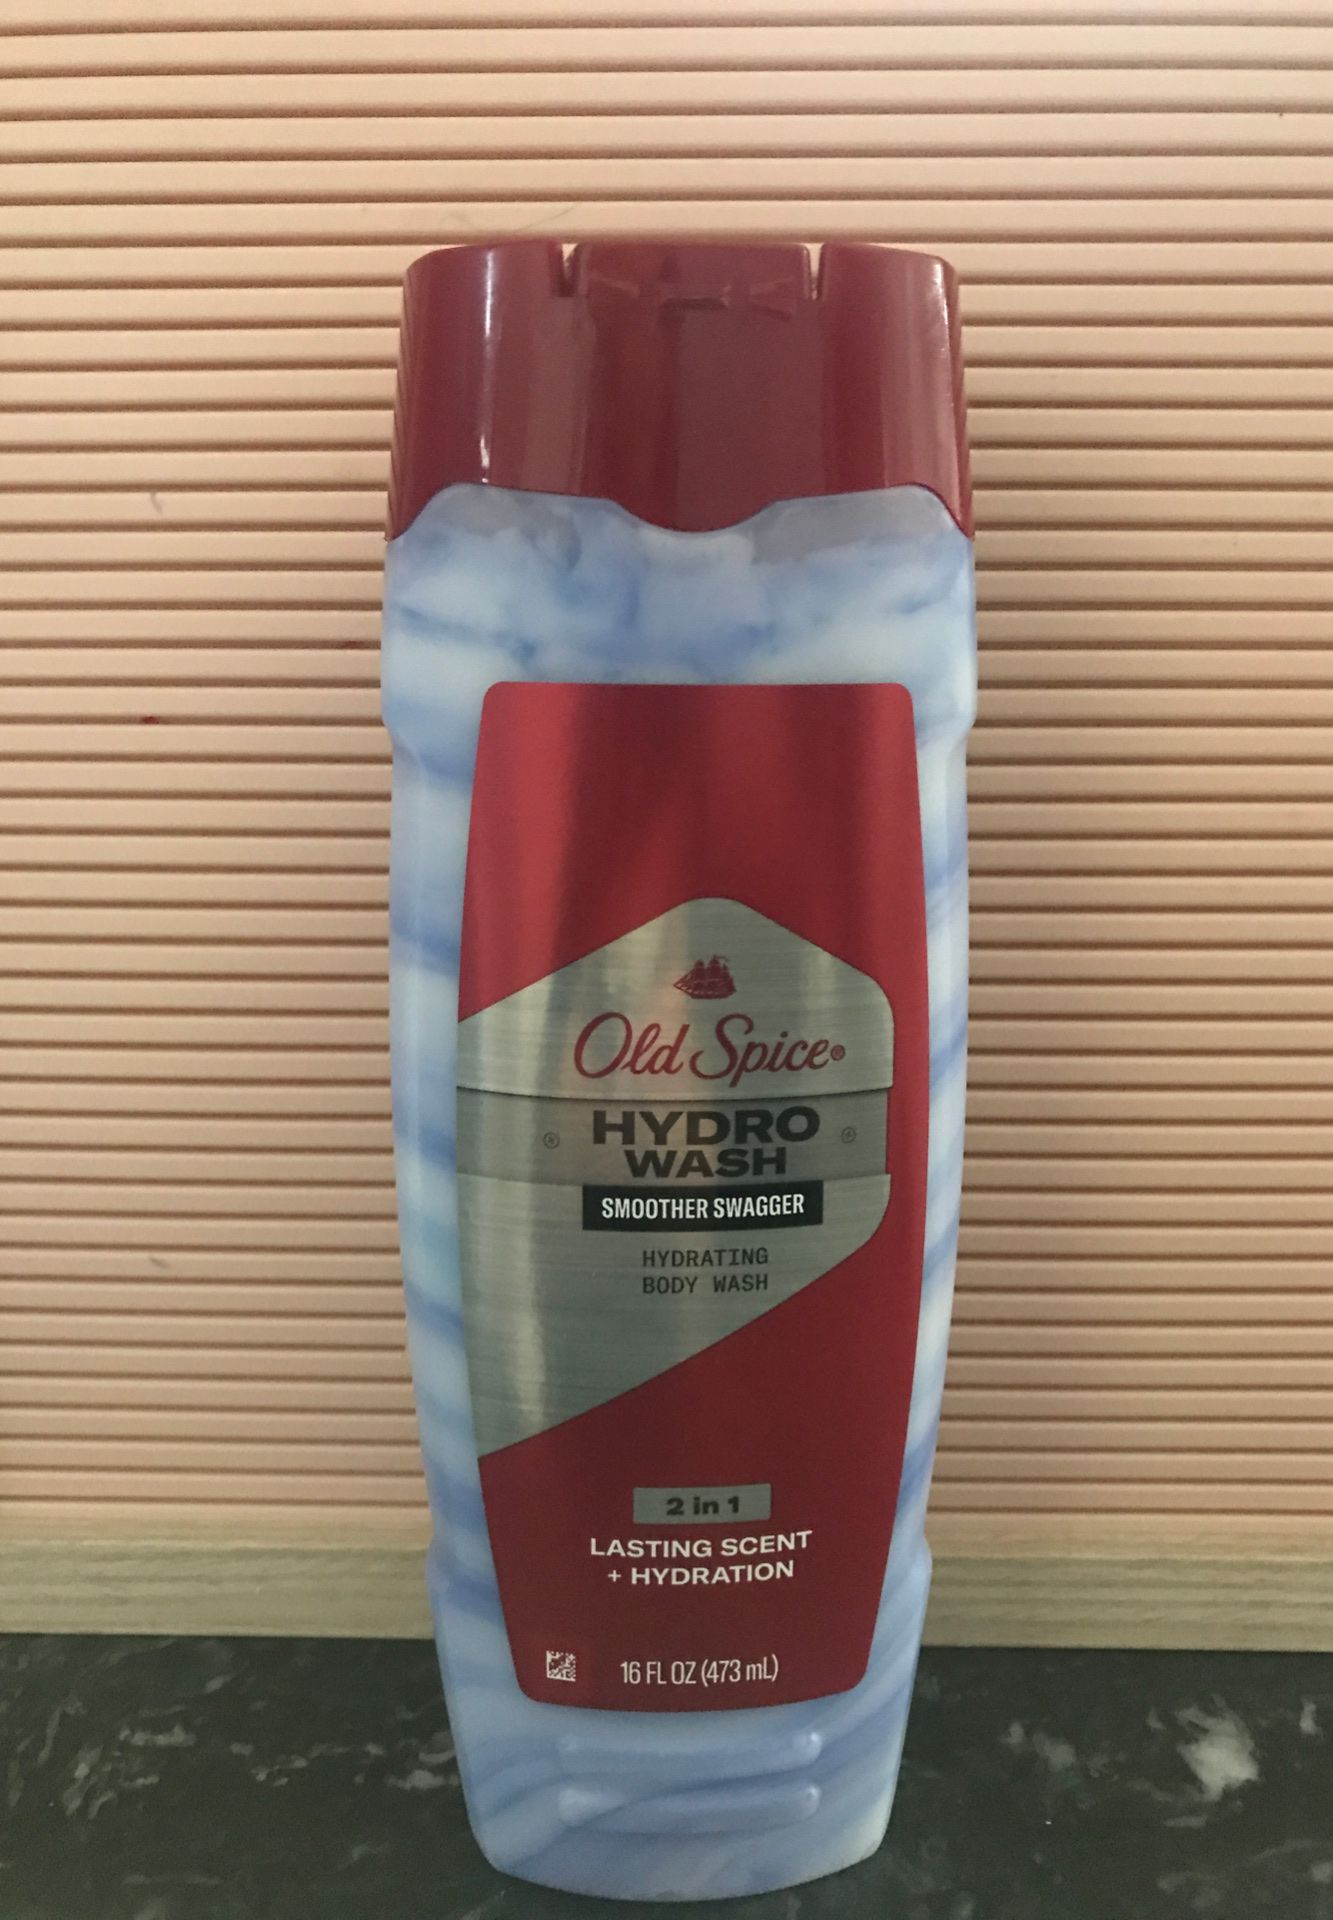 Old Spice Hydro Wash 2 in 1